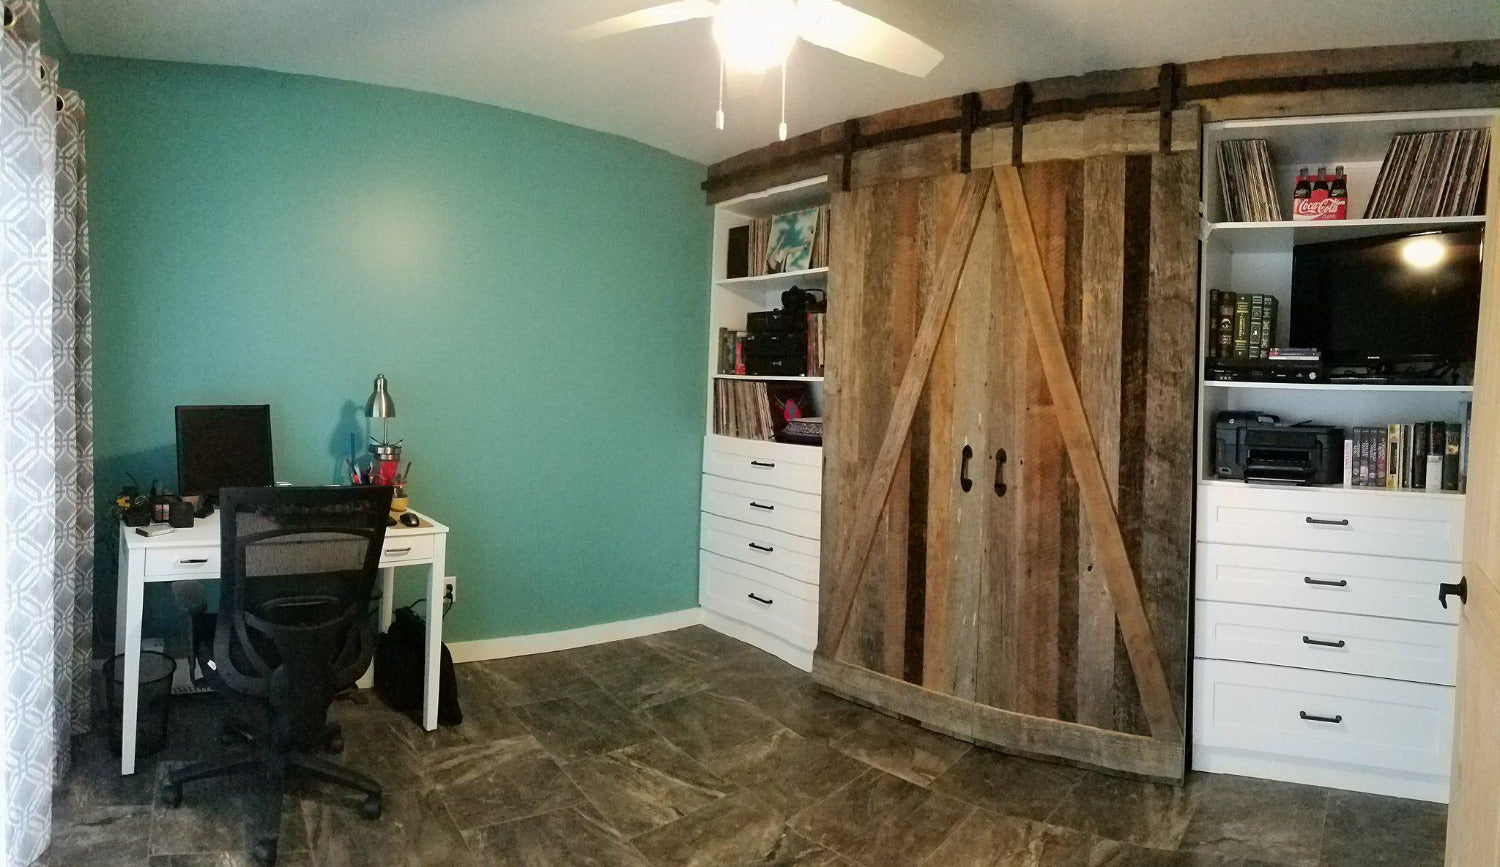 The Next Bed Wall-Mounted Murphy Bed Frame in close barn door style